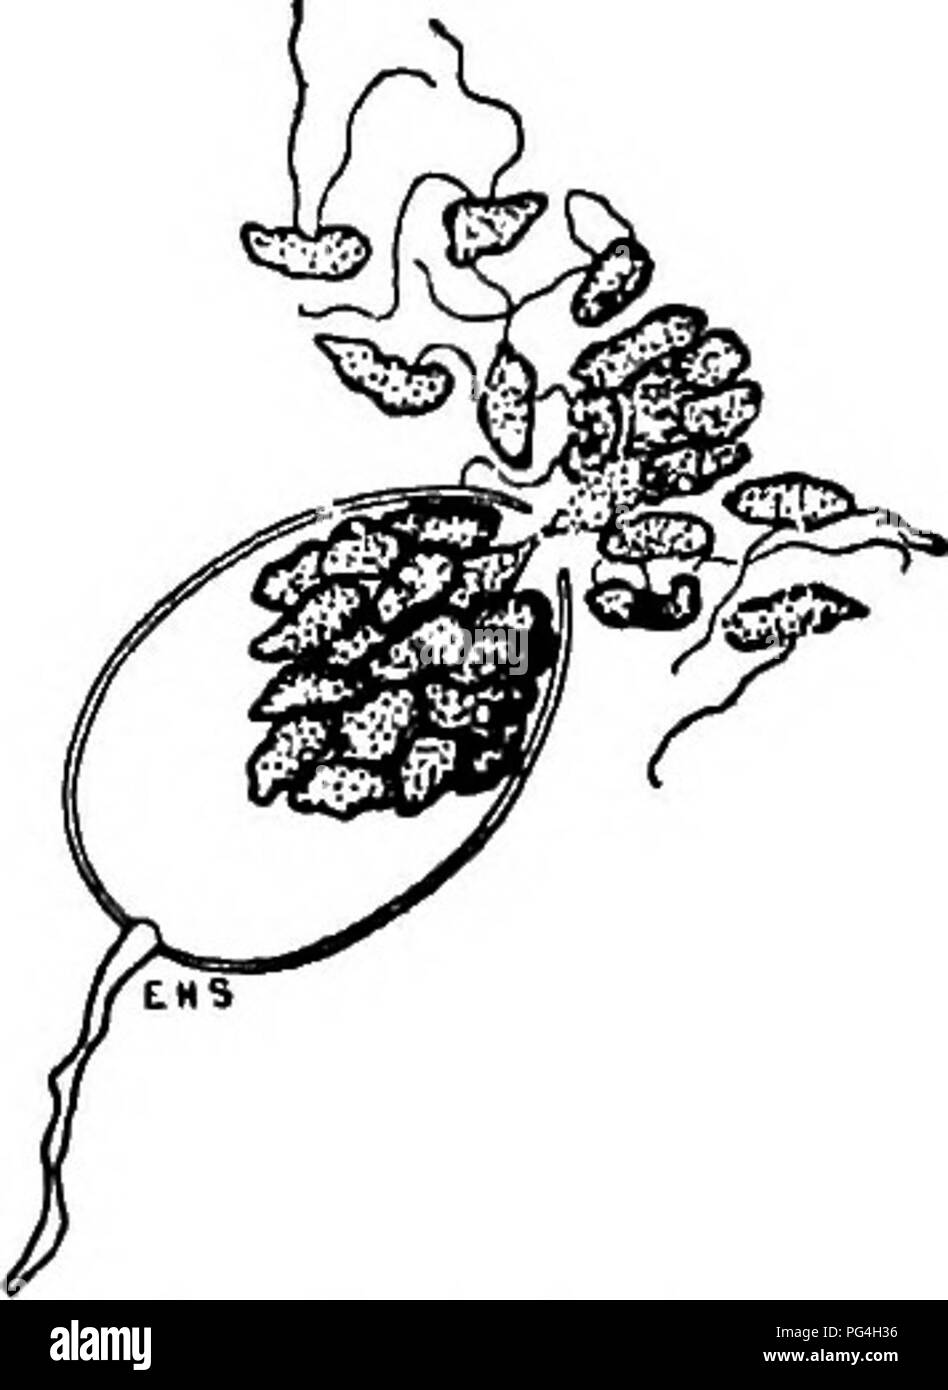 . The fungi which cause plant disease . Plant diseases; Fungi. THE FUNGI WHICH CAUSE PLANT DISEASE 77. Fig. 47.—^P. citriophora; de- velopment of swarmsporea from sporangia. After Smith and Smith. and the contents of the antheridium are carried over to the egg by a fertilizing tube. Members of the genus are aggressively parasitic only under most favorable environmental conditions of heat an(f moisture. Some sixteen species are known. P. de baryanum Hesse, is most com- mon''&quot;'' as the cause of &quot;Damping Off.&quot; Zoosporangia or &quot;conidia&quot; globose to eUiptic, usually papillat Stock Photo